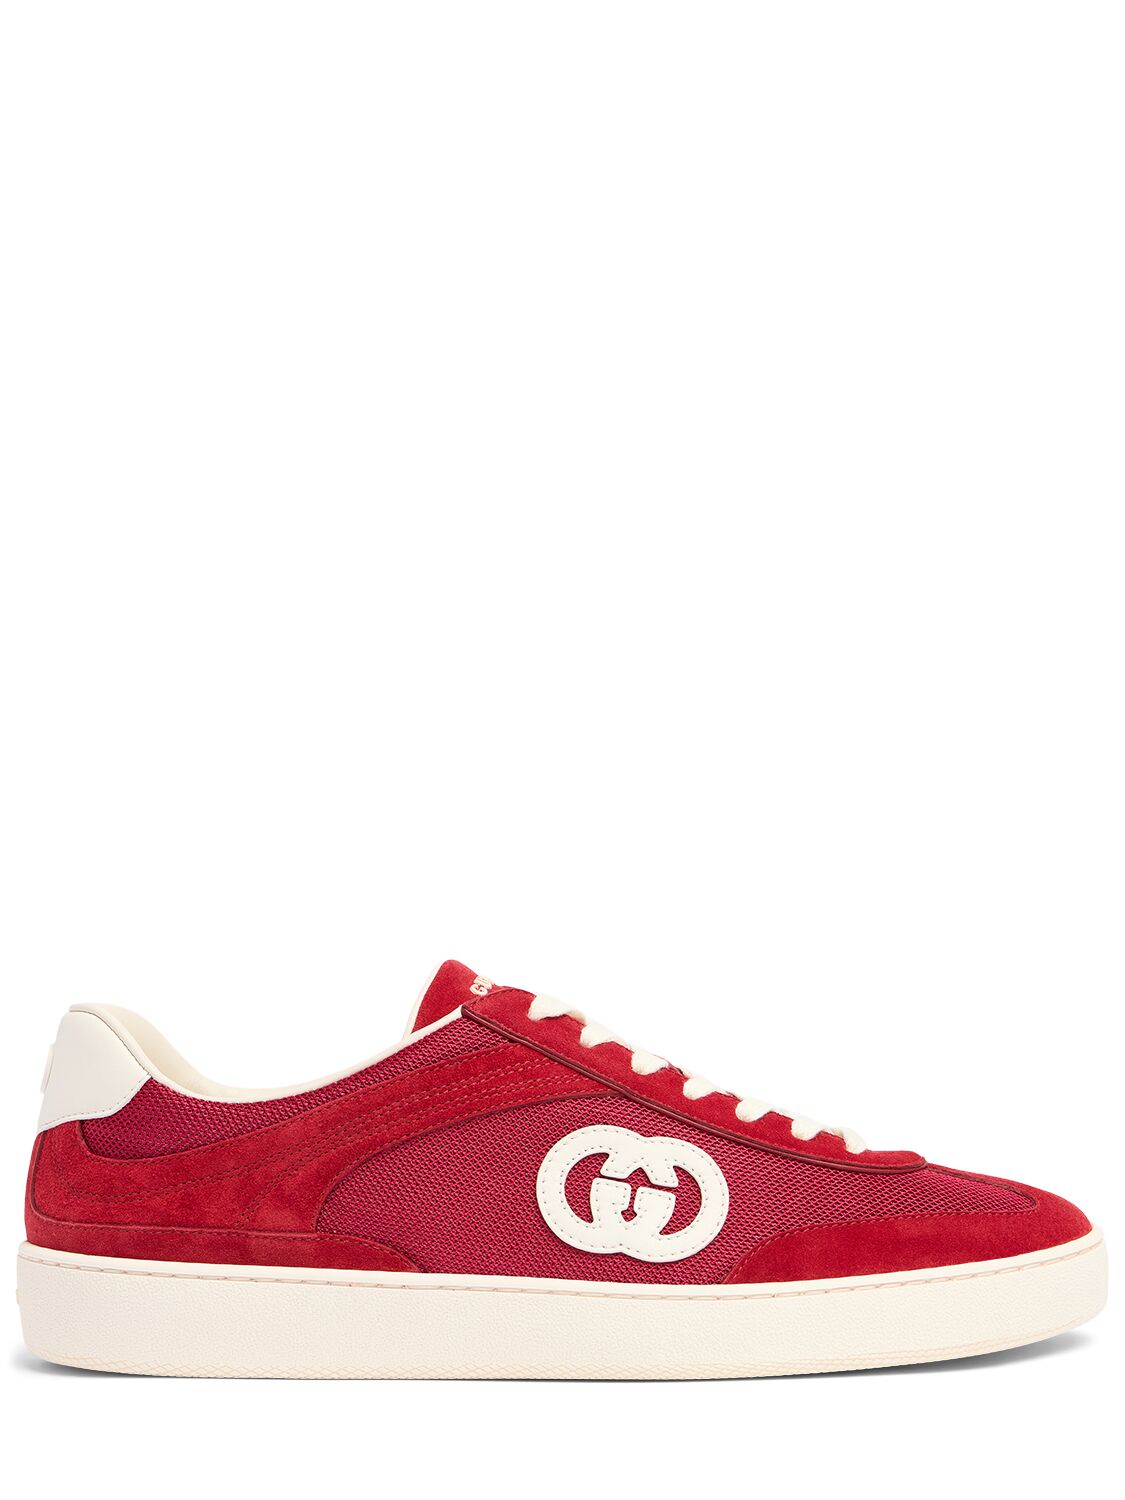 Gucci G74 Gg Suede & Fabric Sneakers In Red